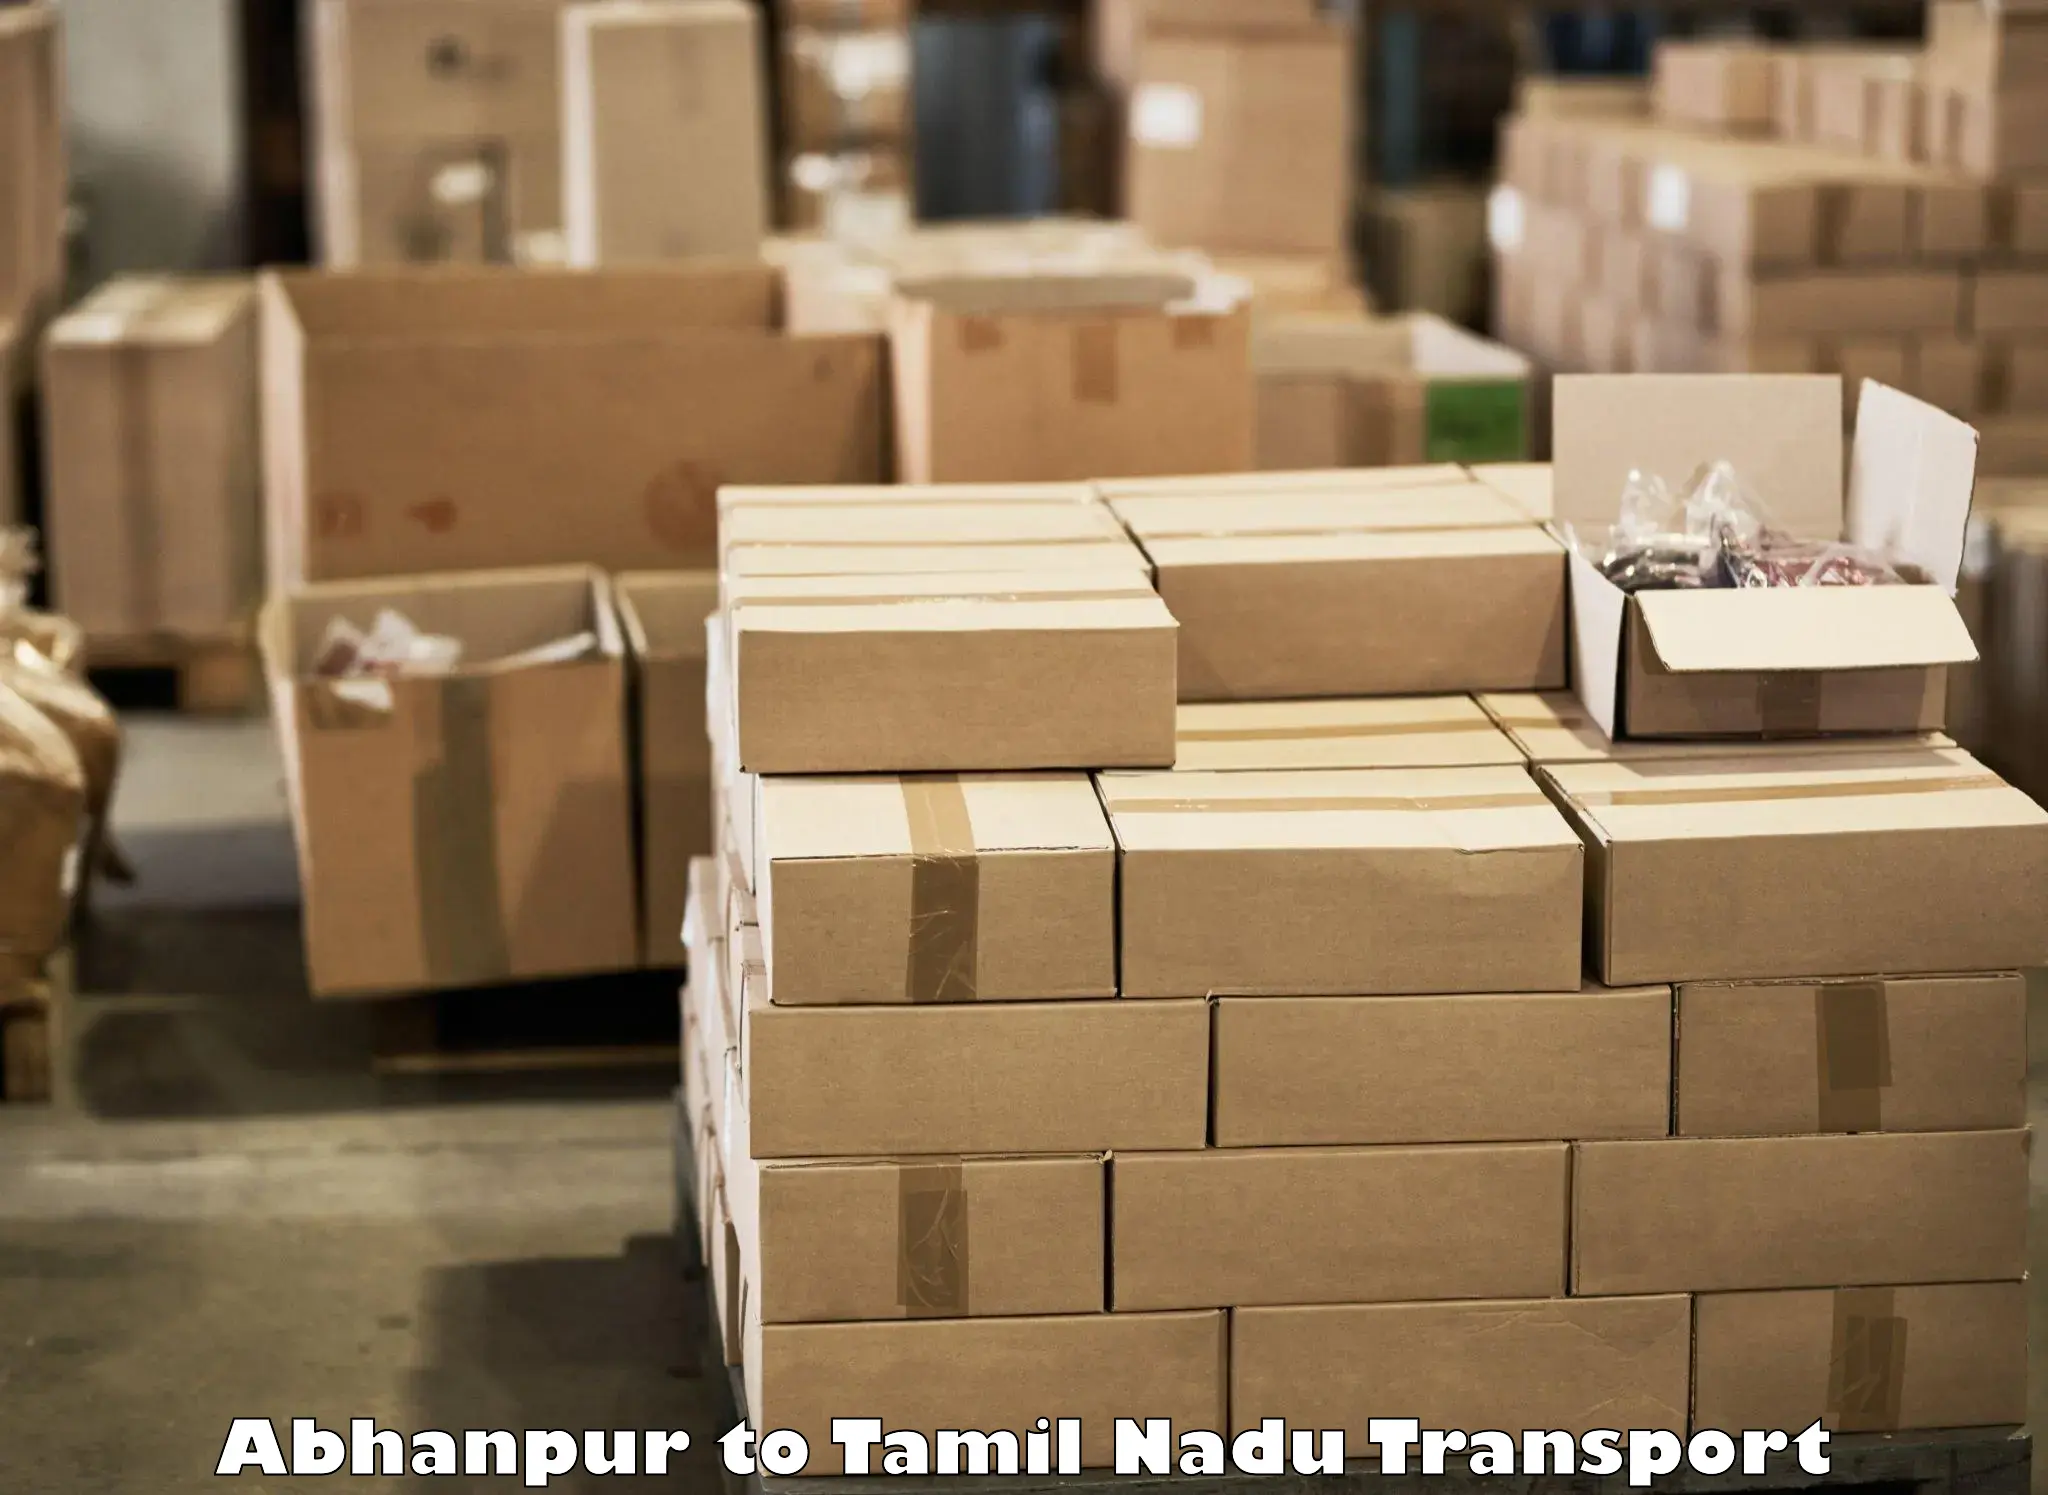 Express transport services Abhanpur to Thisayanvilai